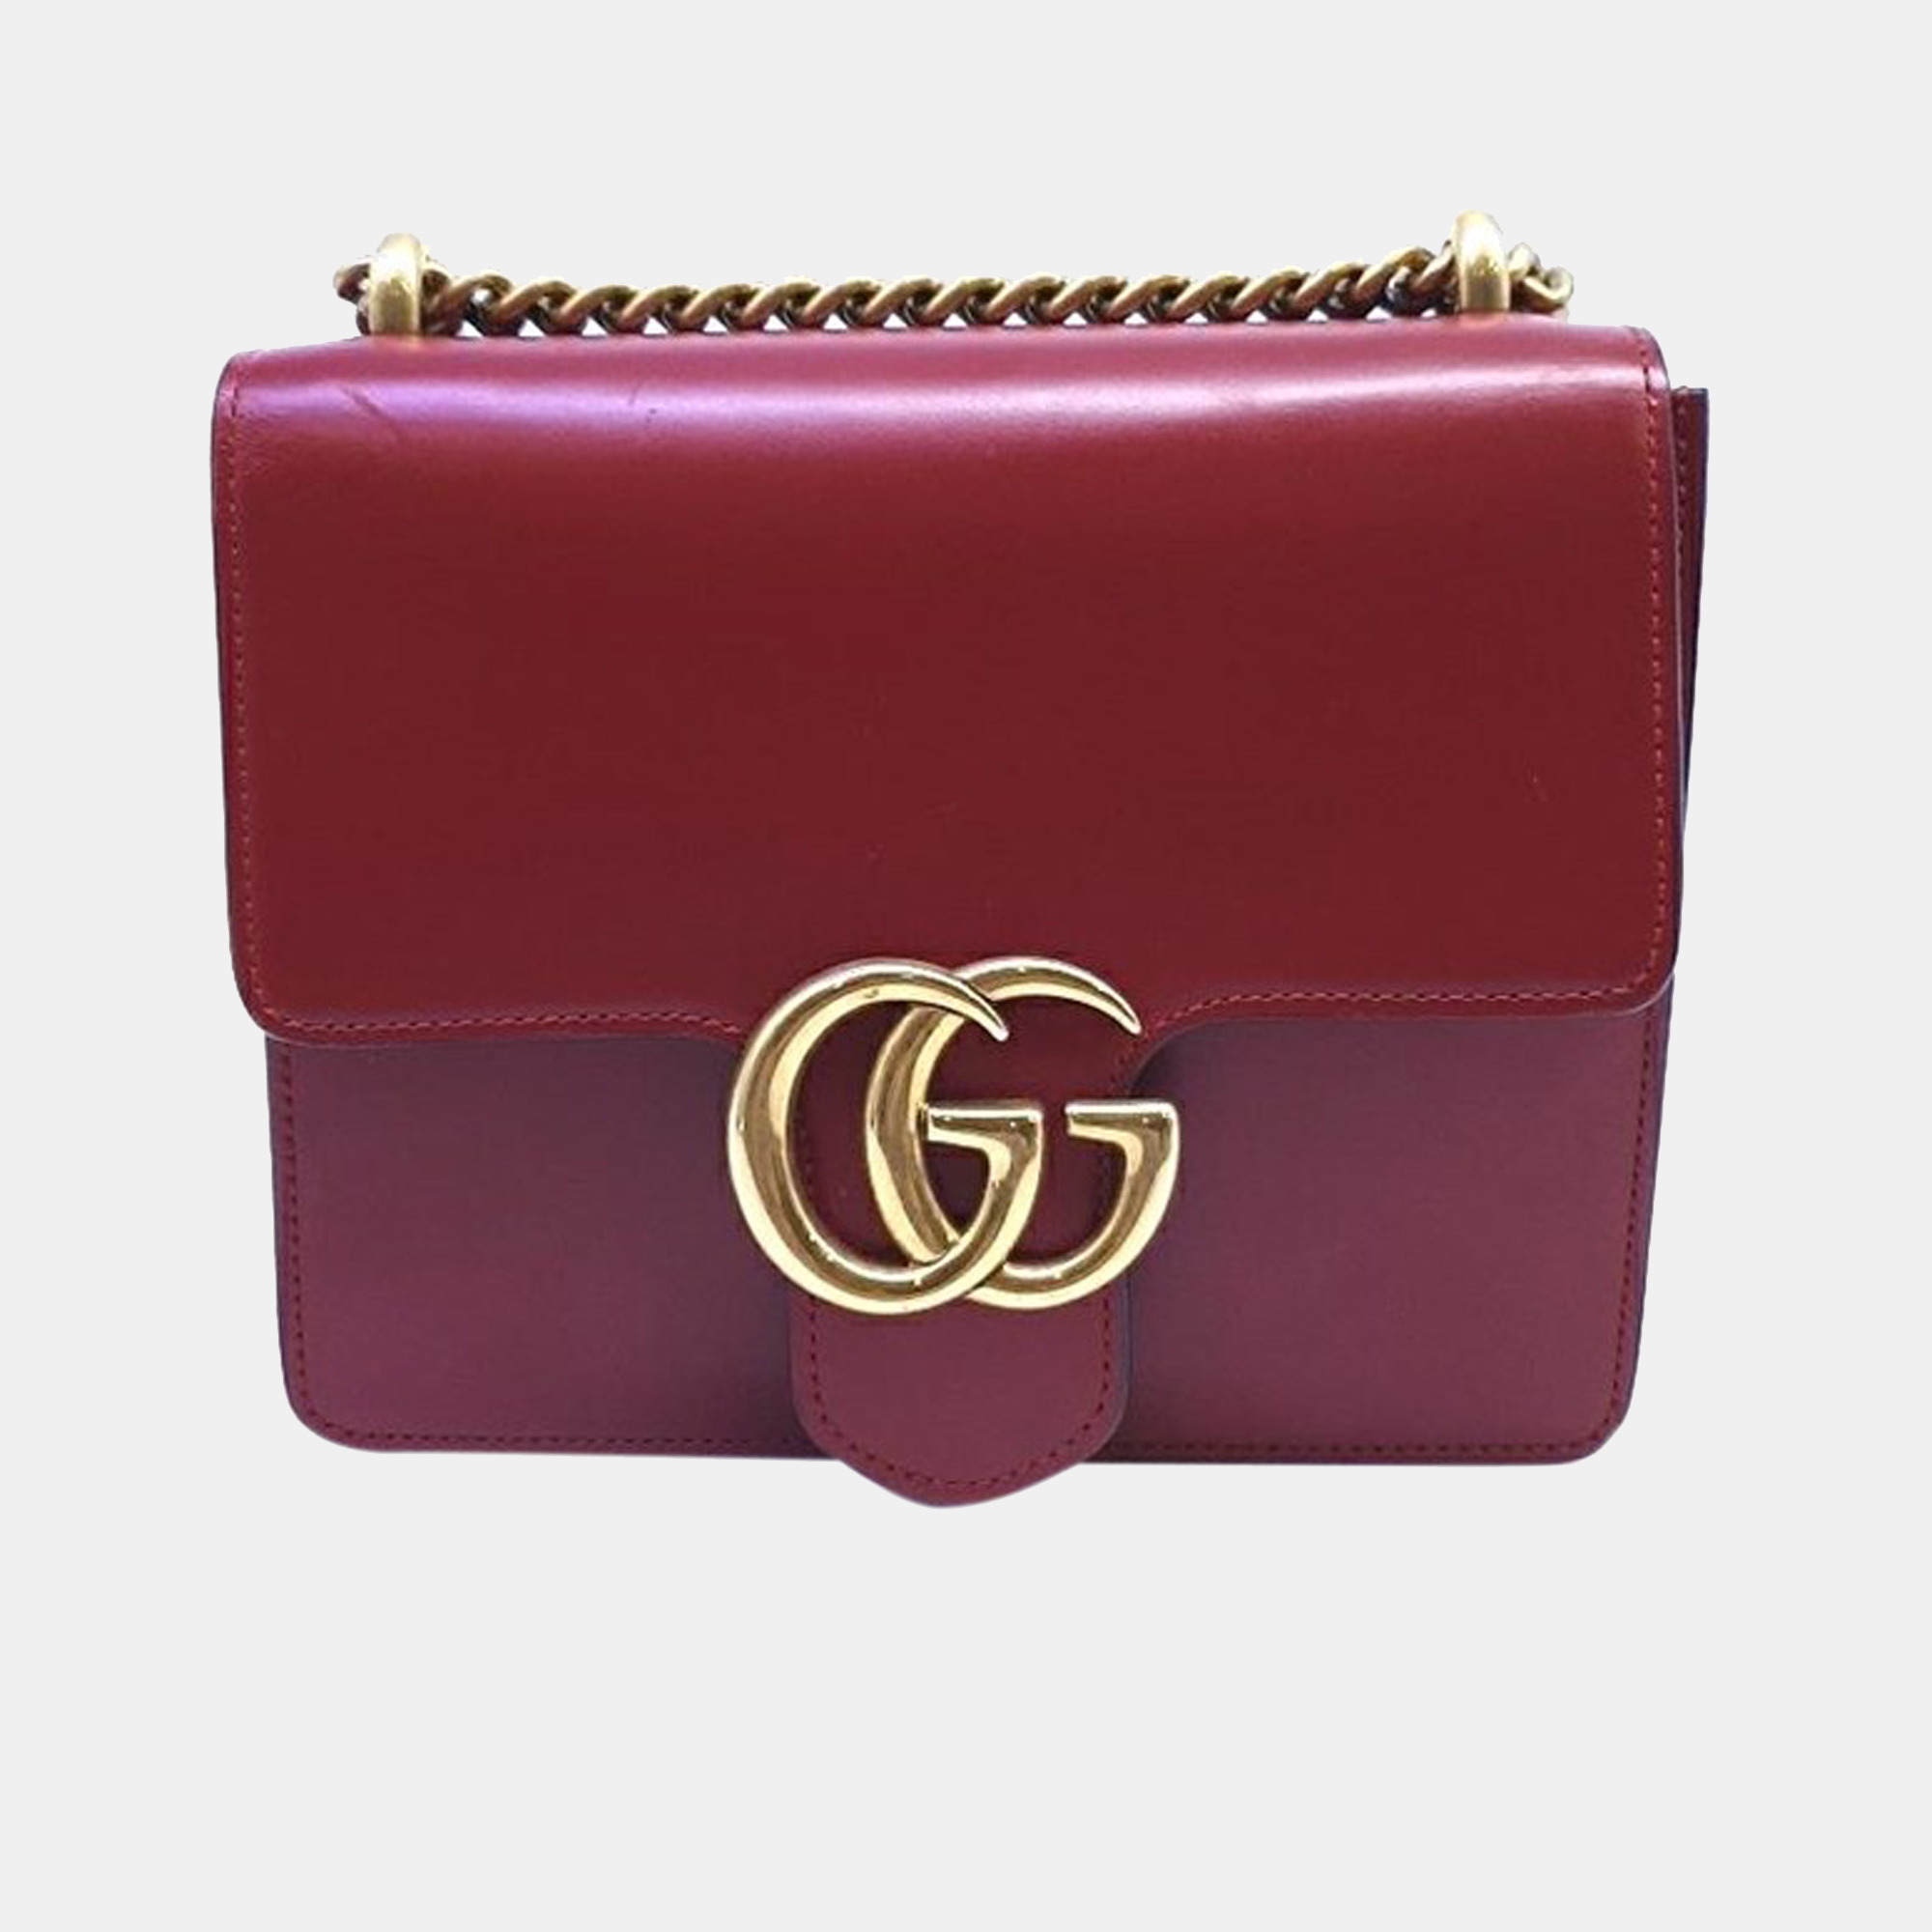 Gucci red leather gg marmont shoulder bag